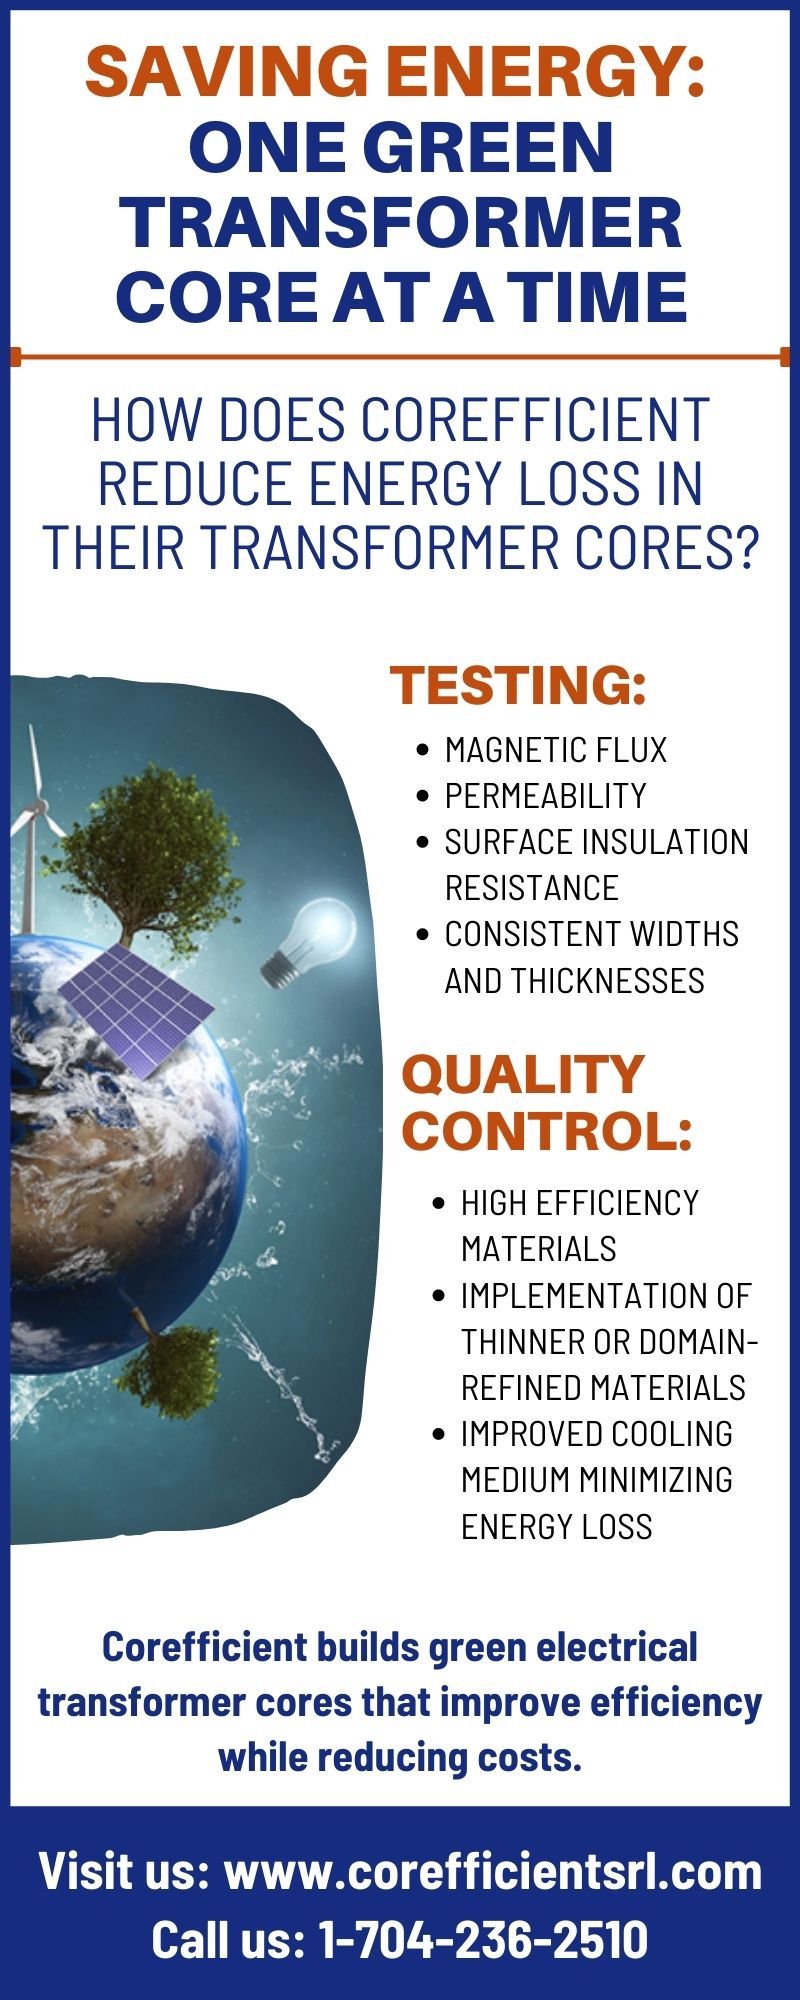 Blue and white infographic on the topic of Saving Energy: One Green Transformer Core at a Time through the design, testing and quality control facts.